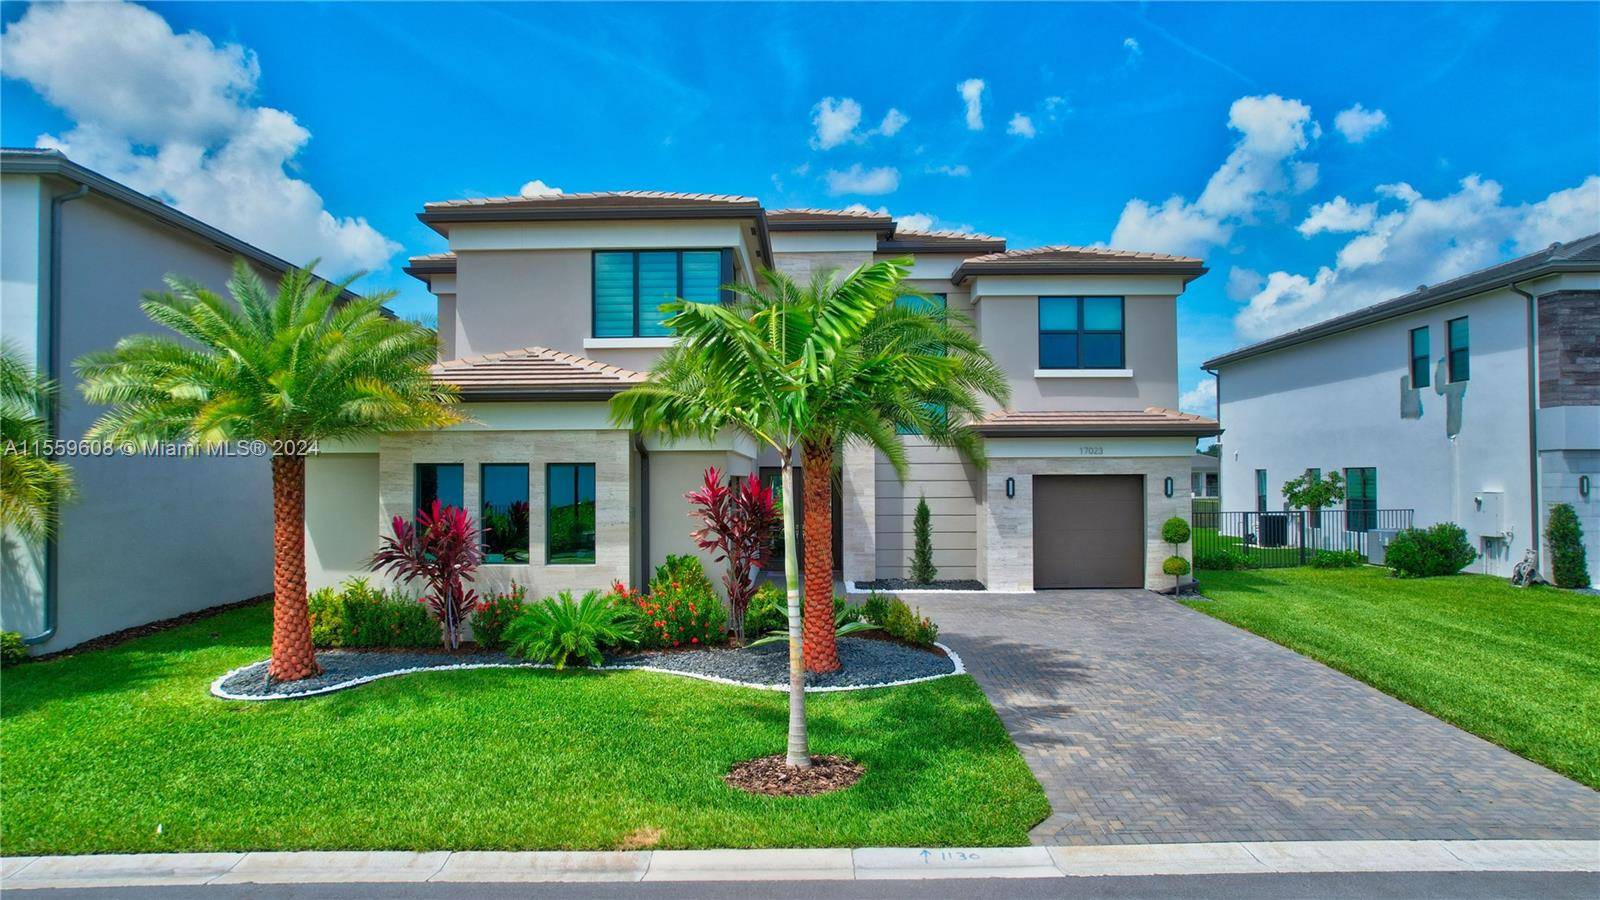 MUST SEE this turnkey FURNISHED gorgeous home in the highly sought after community of Lotus.